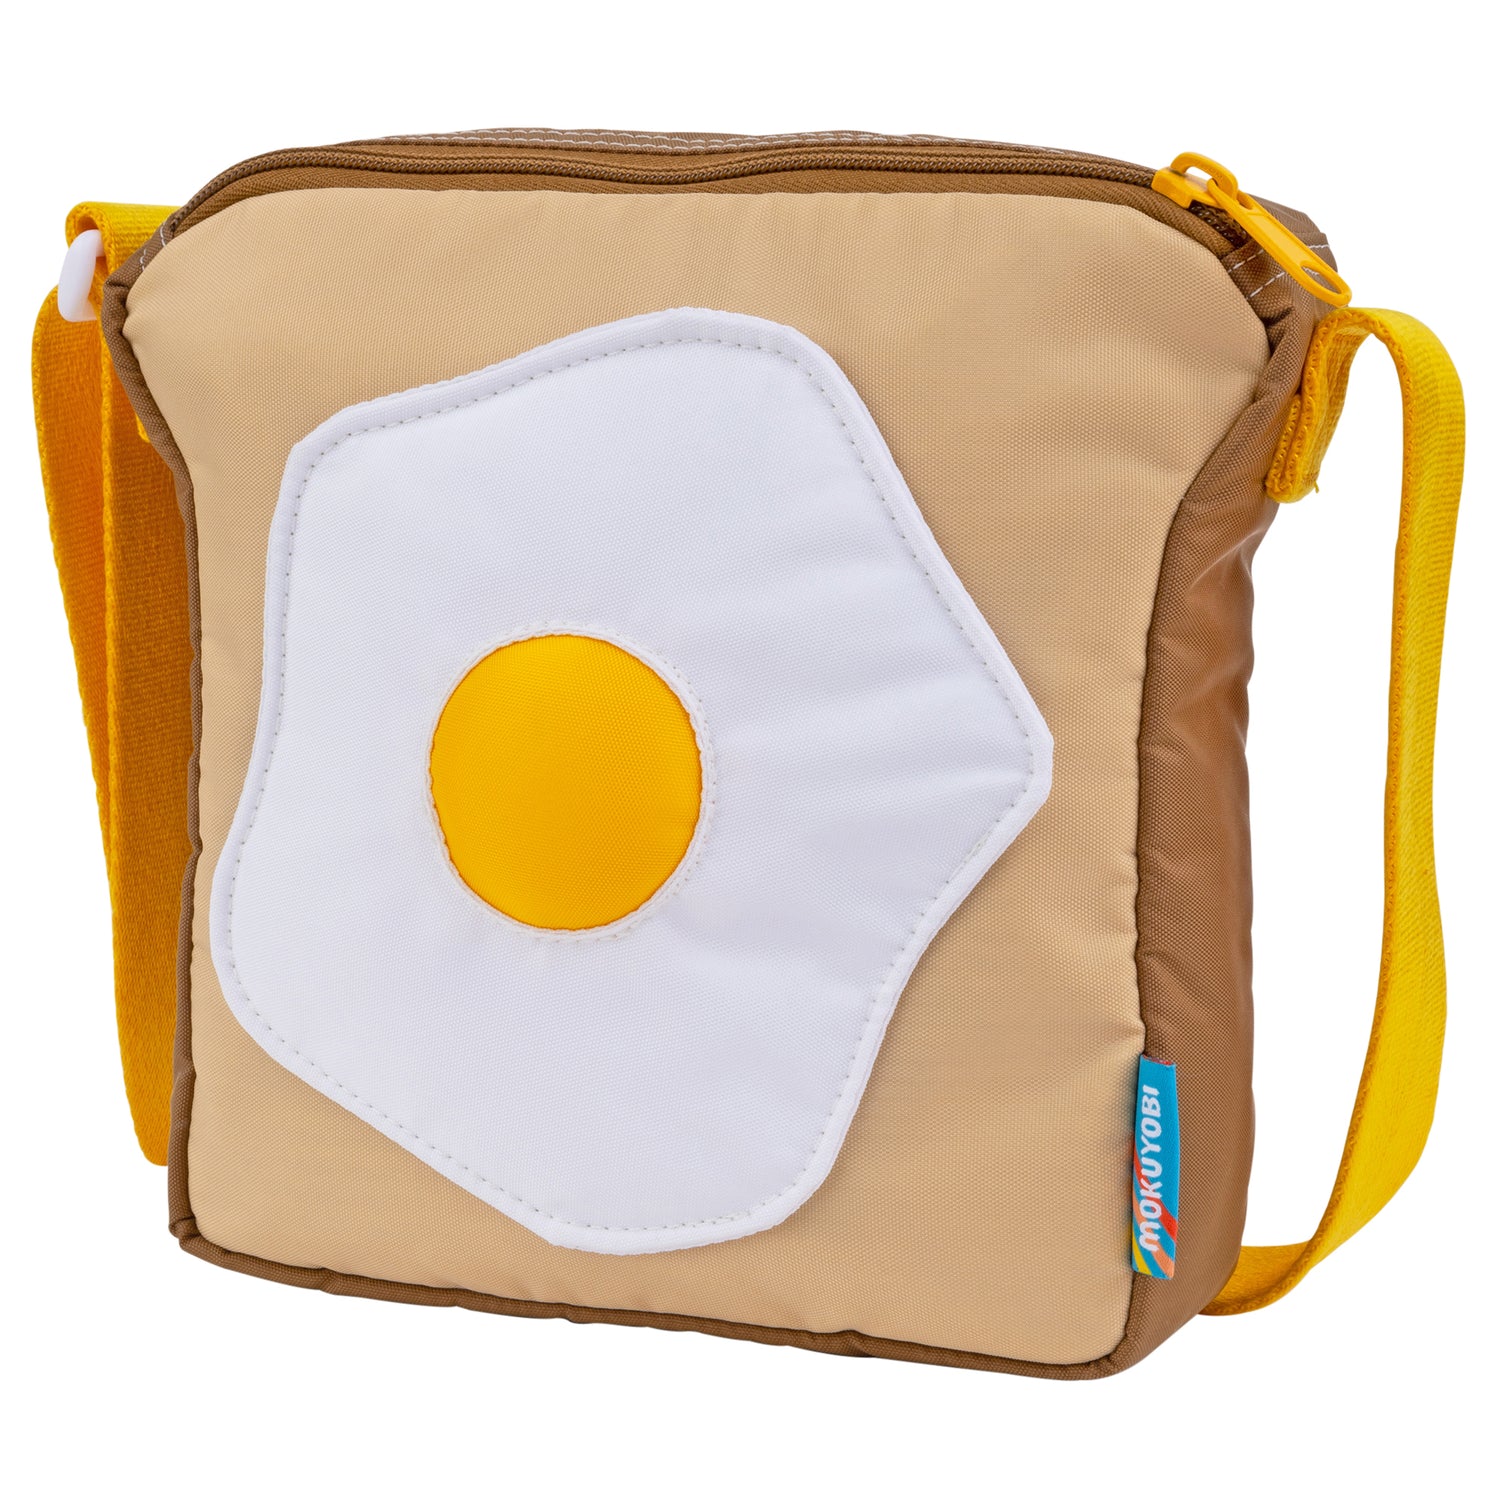 crossbody bag in the shape of toast with an egg and pocket with zipper.